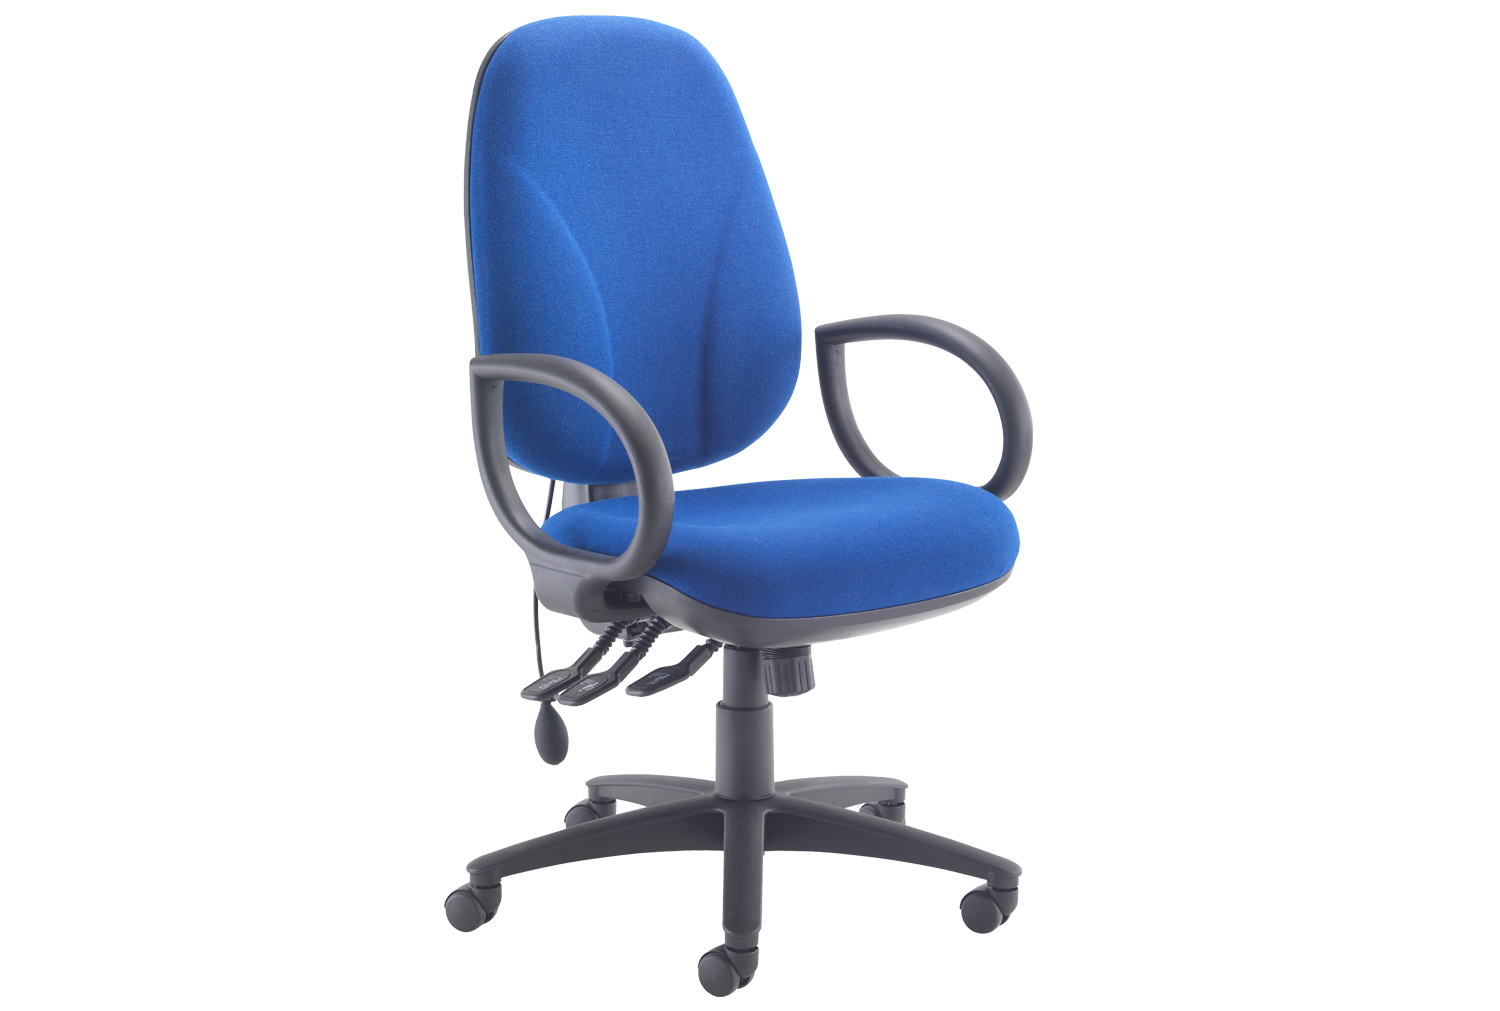 Orchid Deluxe High Back Lumbar Pump Operator Office Chair With Fixed Arms, Blue, Fully Installed